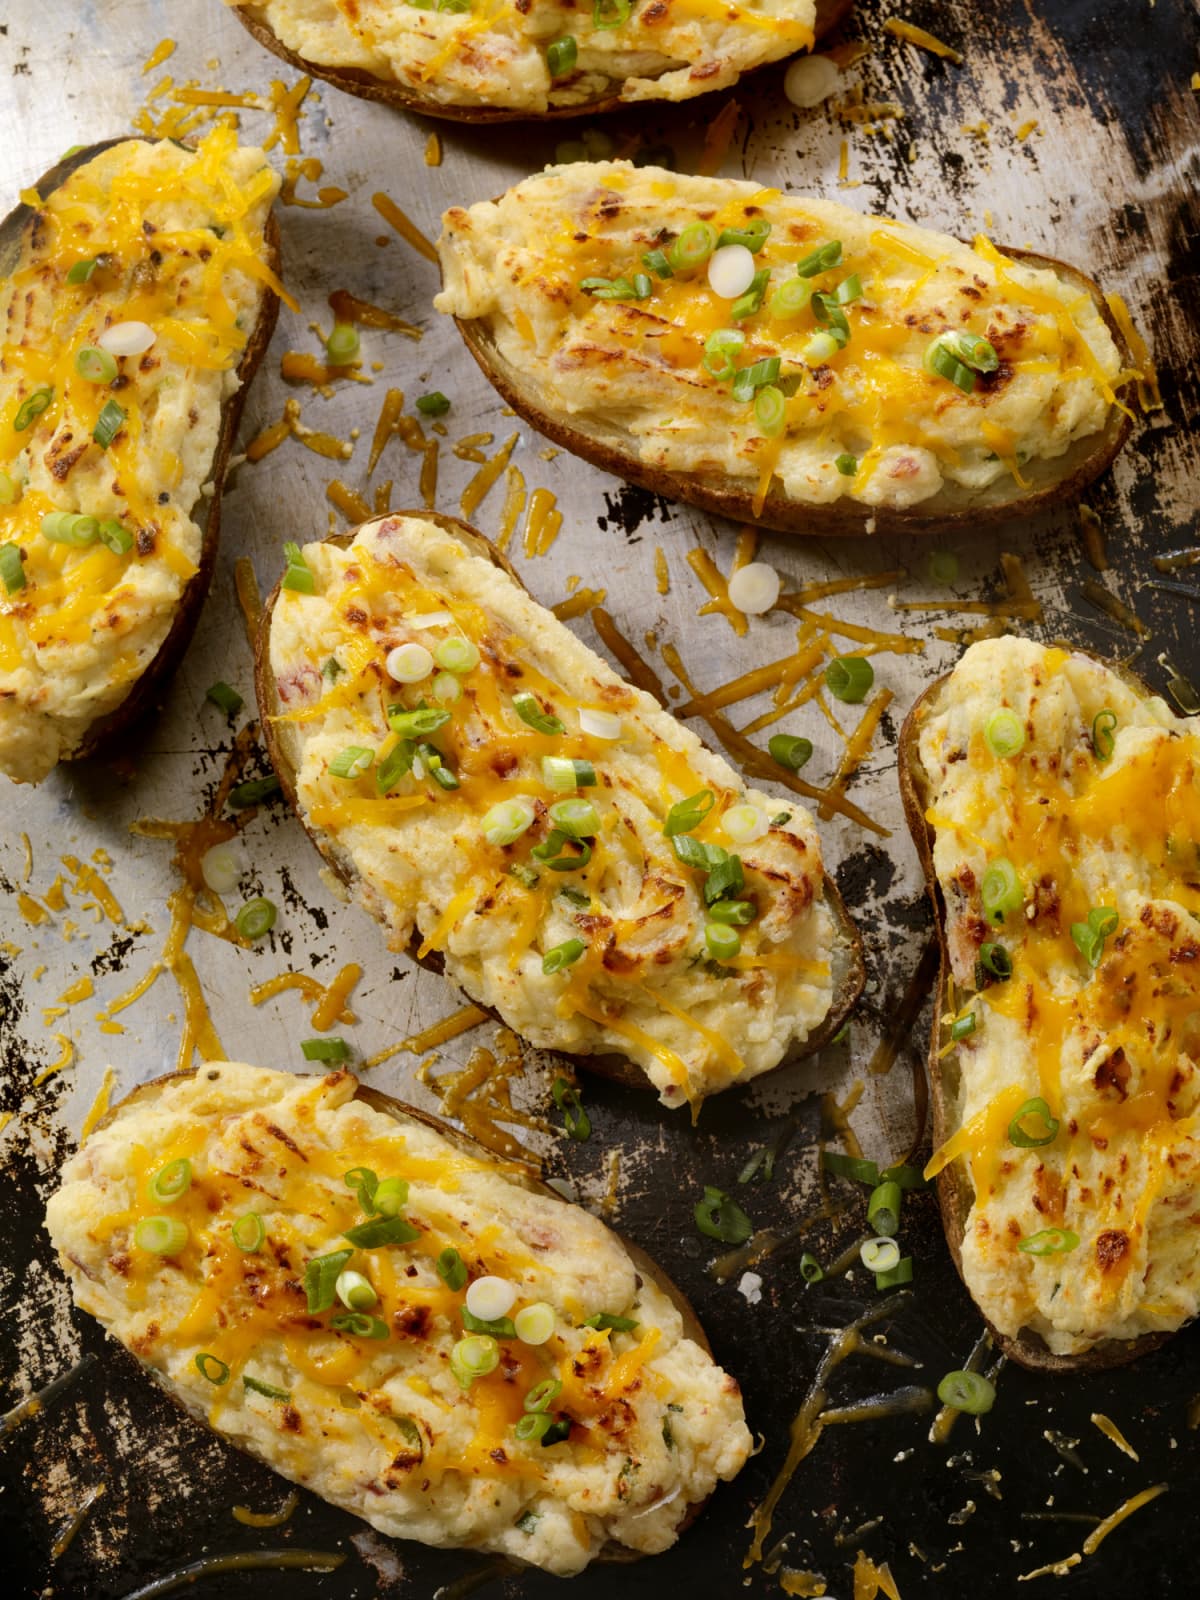 Baked potatoes stuffed with tuna, cheese, and scallions